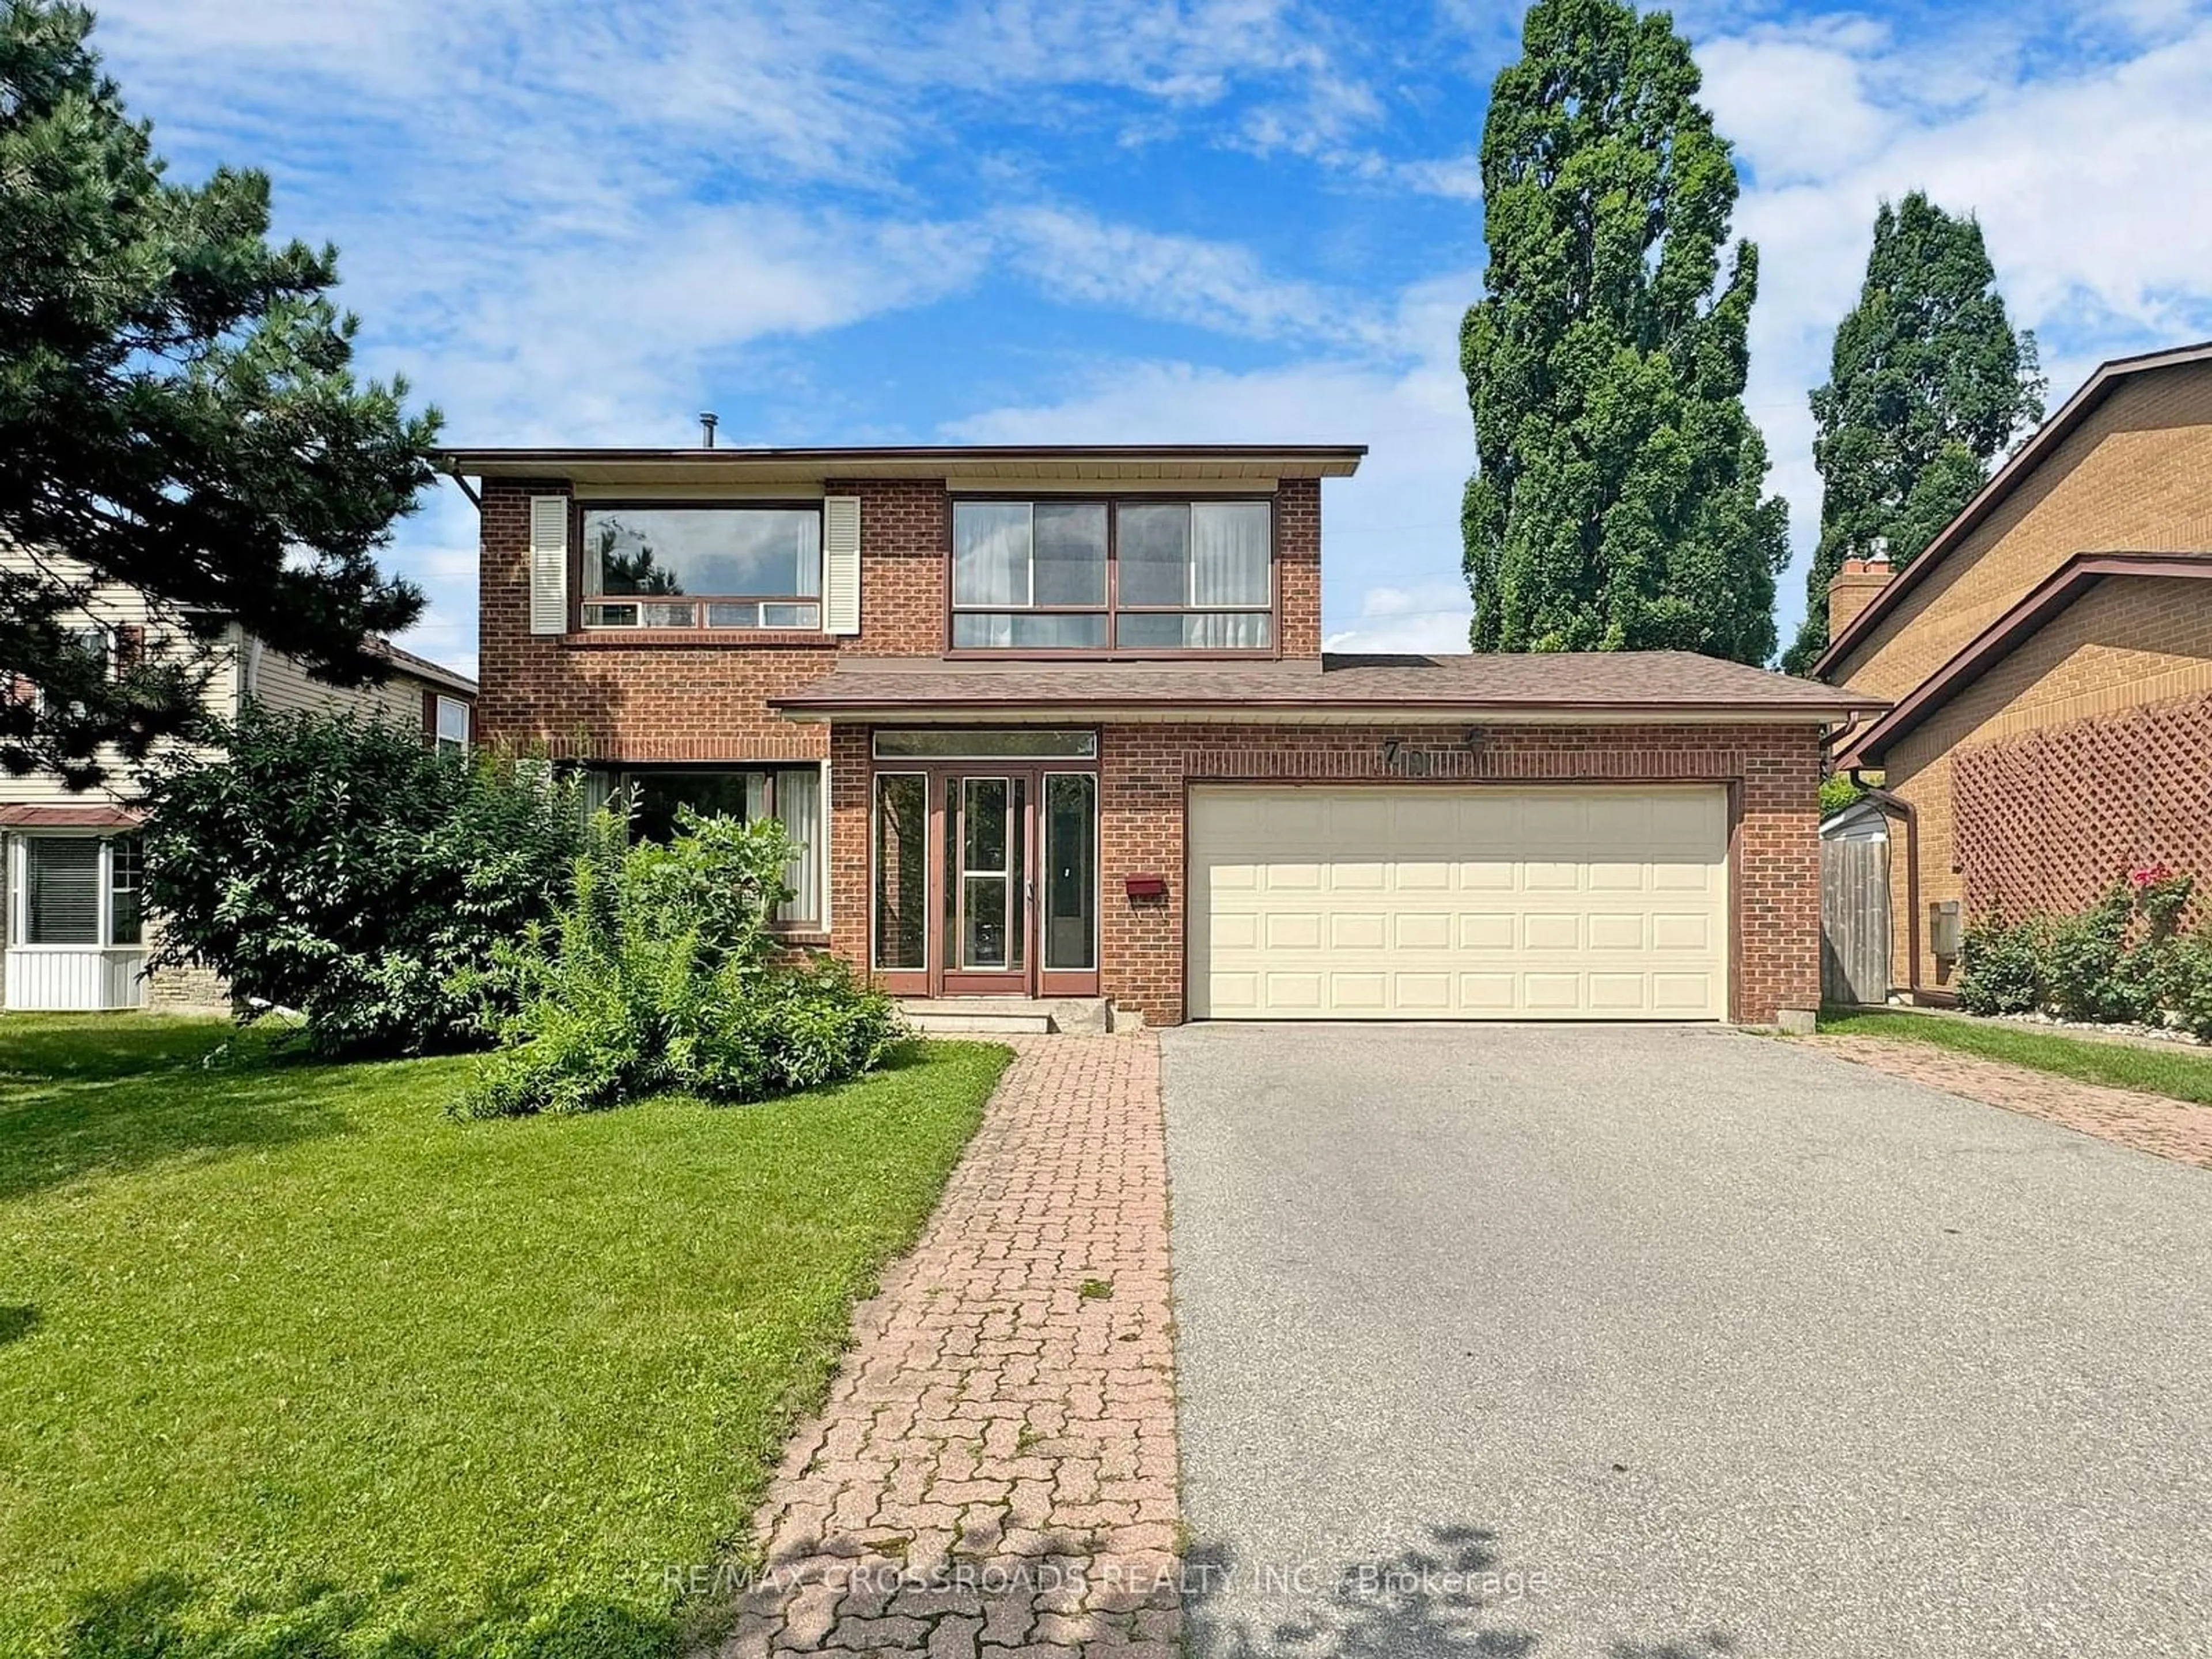 Home with brick exterior material for 79 Huntsmill Blvd, Toronto Ontario M1W 2Z8